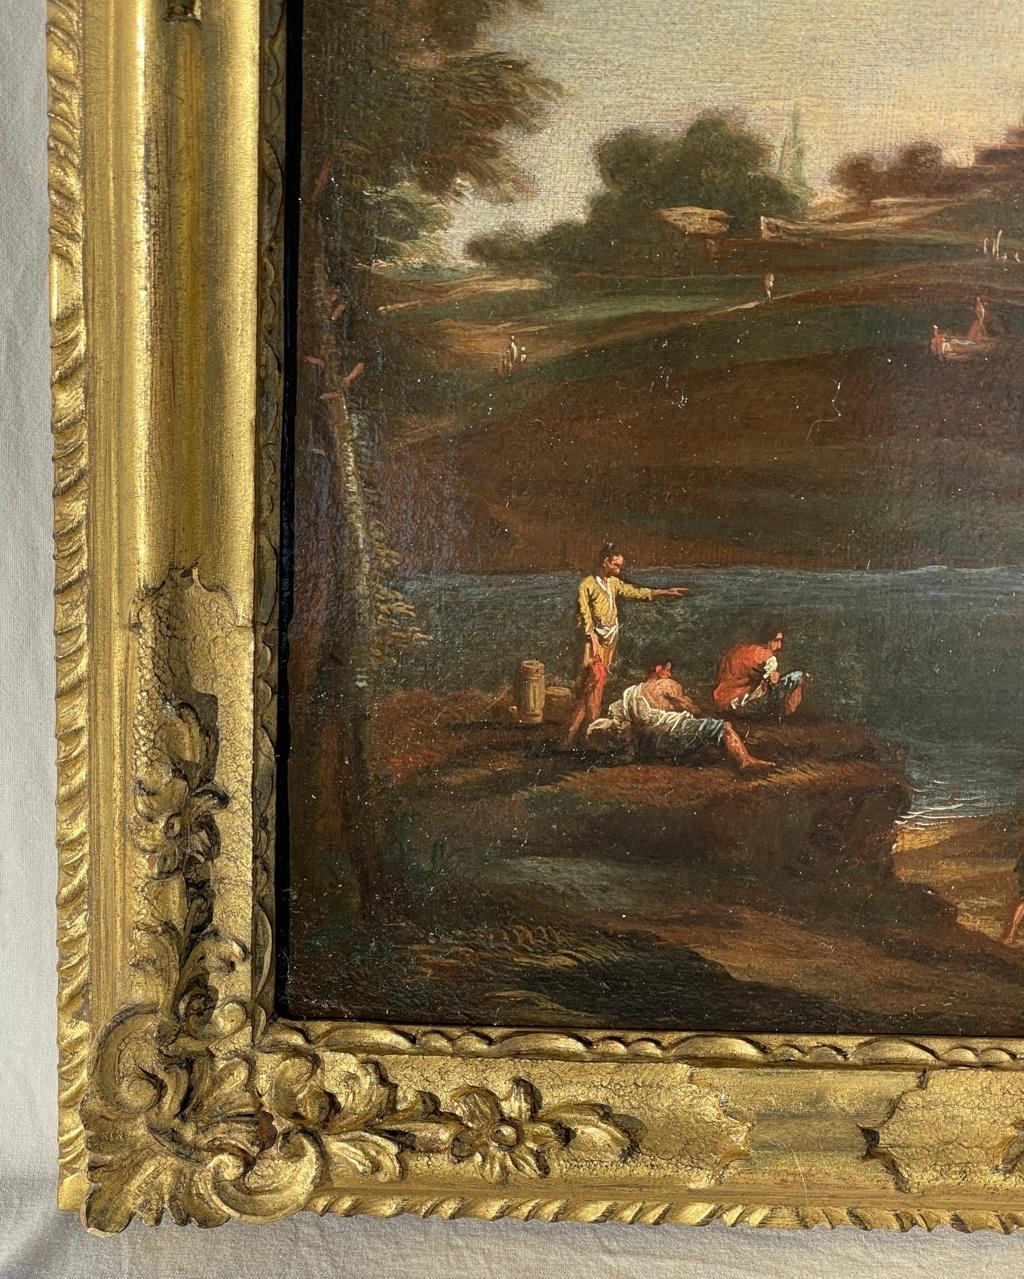 Cerchia di Marco Ricci (Belluno 1676 – Venezia 1730) – River landscape with characters.

34 x 26 cm without frame, 43 x 35 cm with frame.

Oil on canvas, in carved and gilded wooden frame.

-The painting can be placed in the circle of Marco Ricci